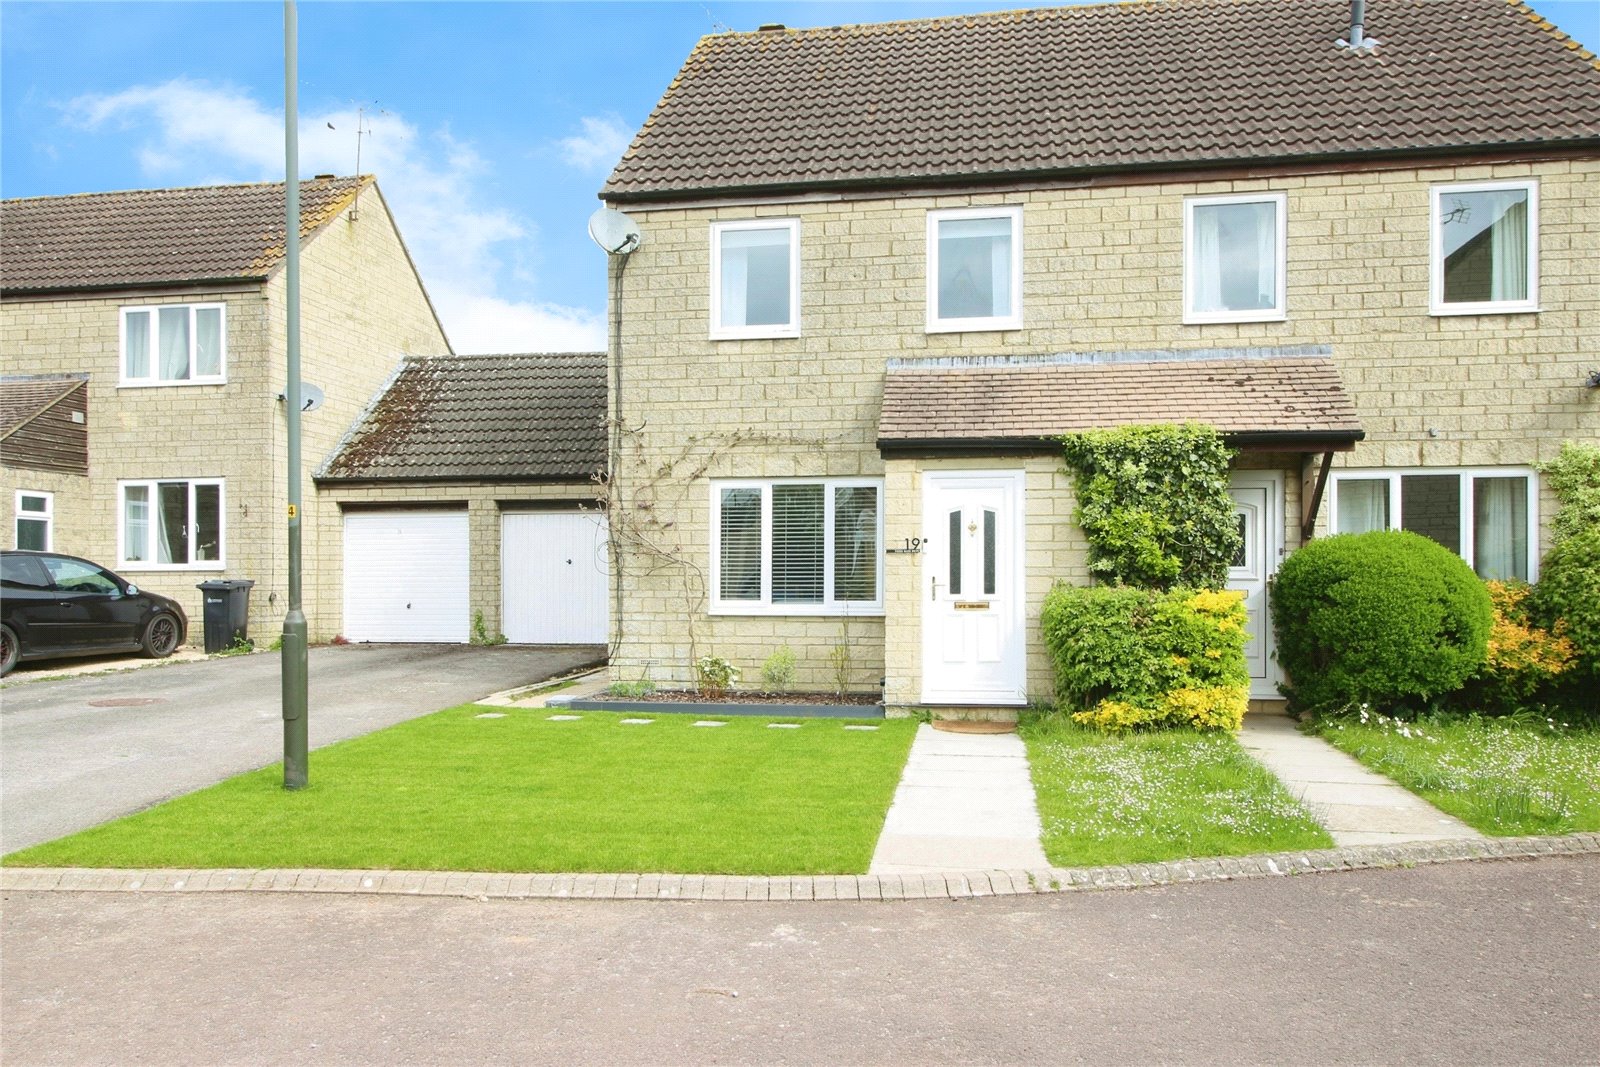 Foxes Bank Drive, Cirencester, Gloucestershire, GL7